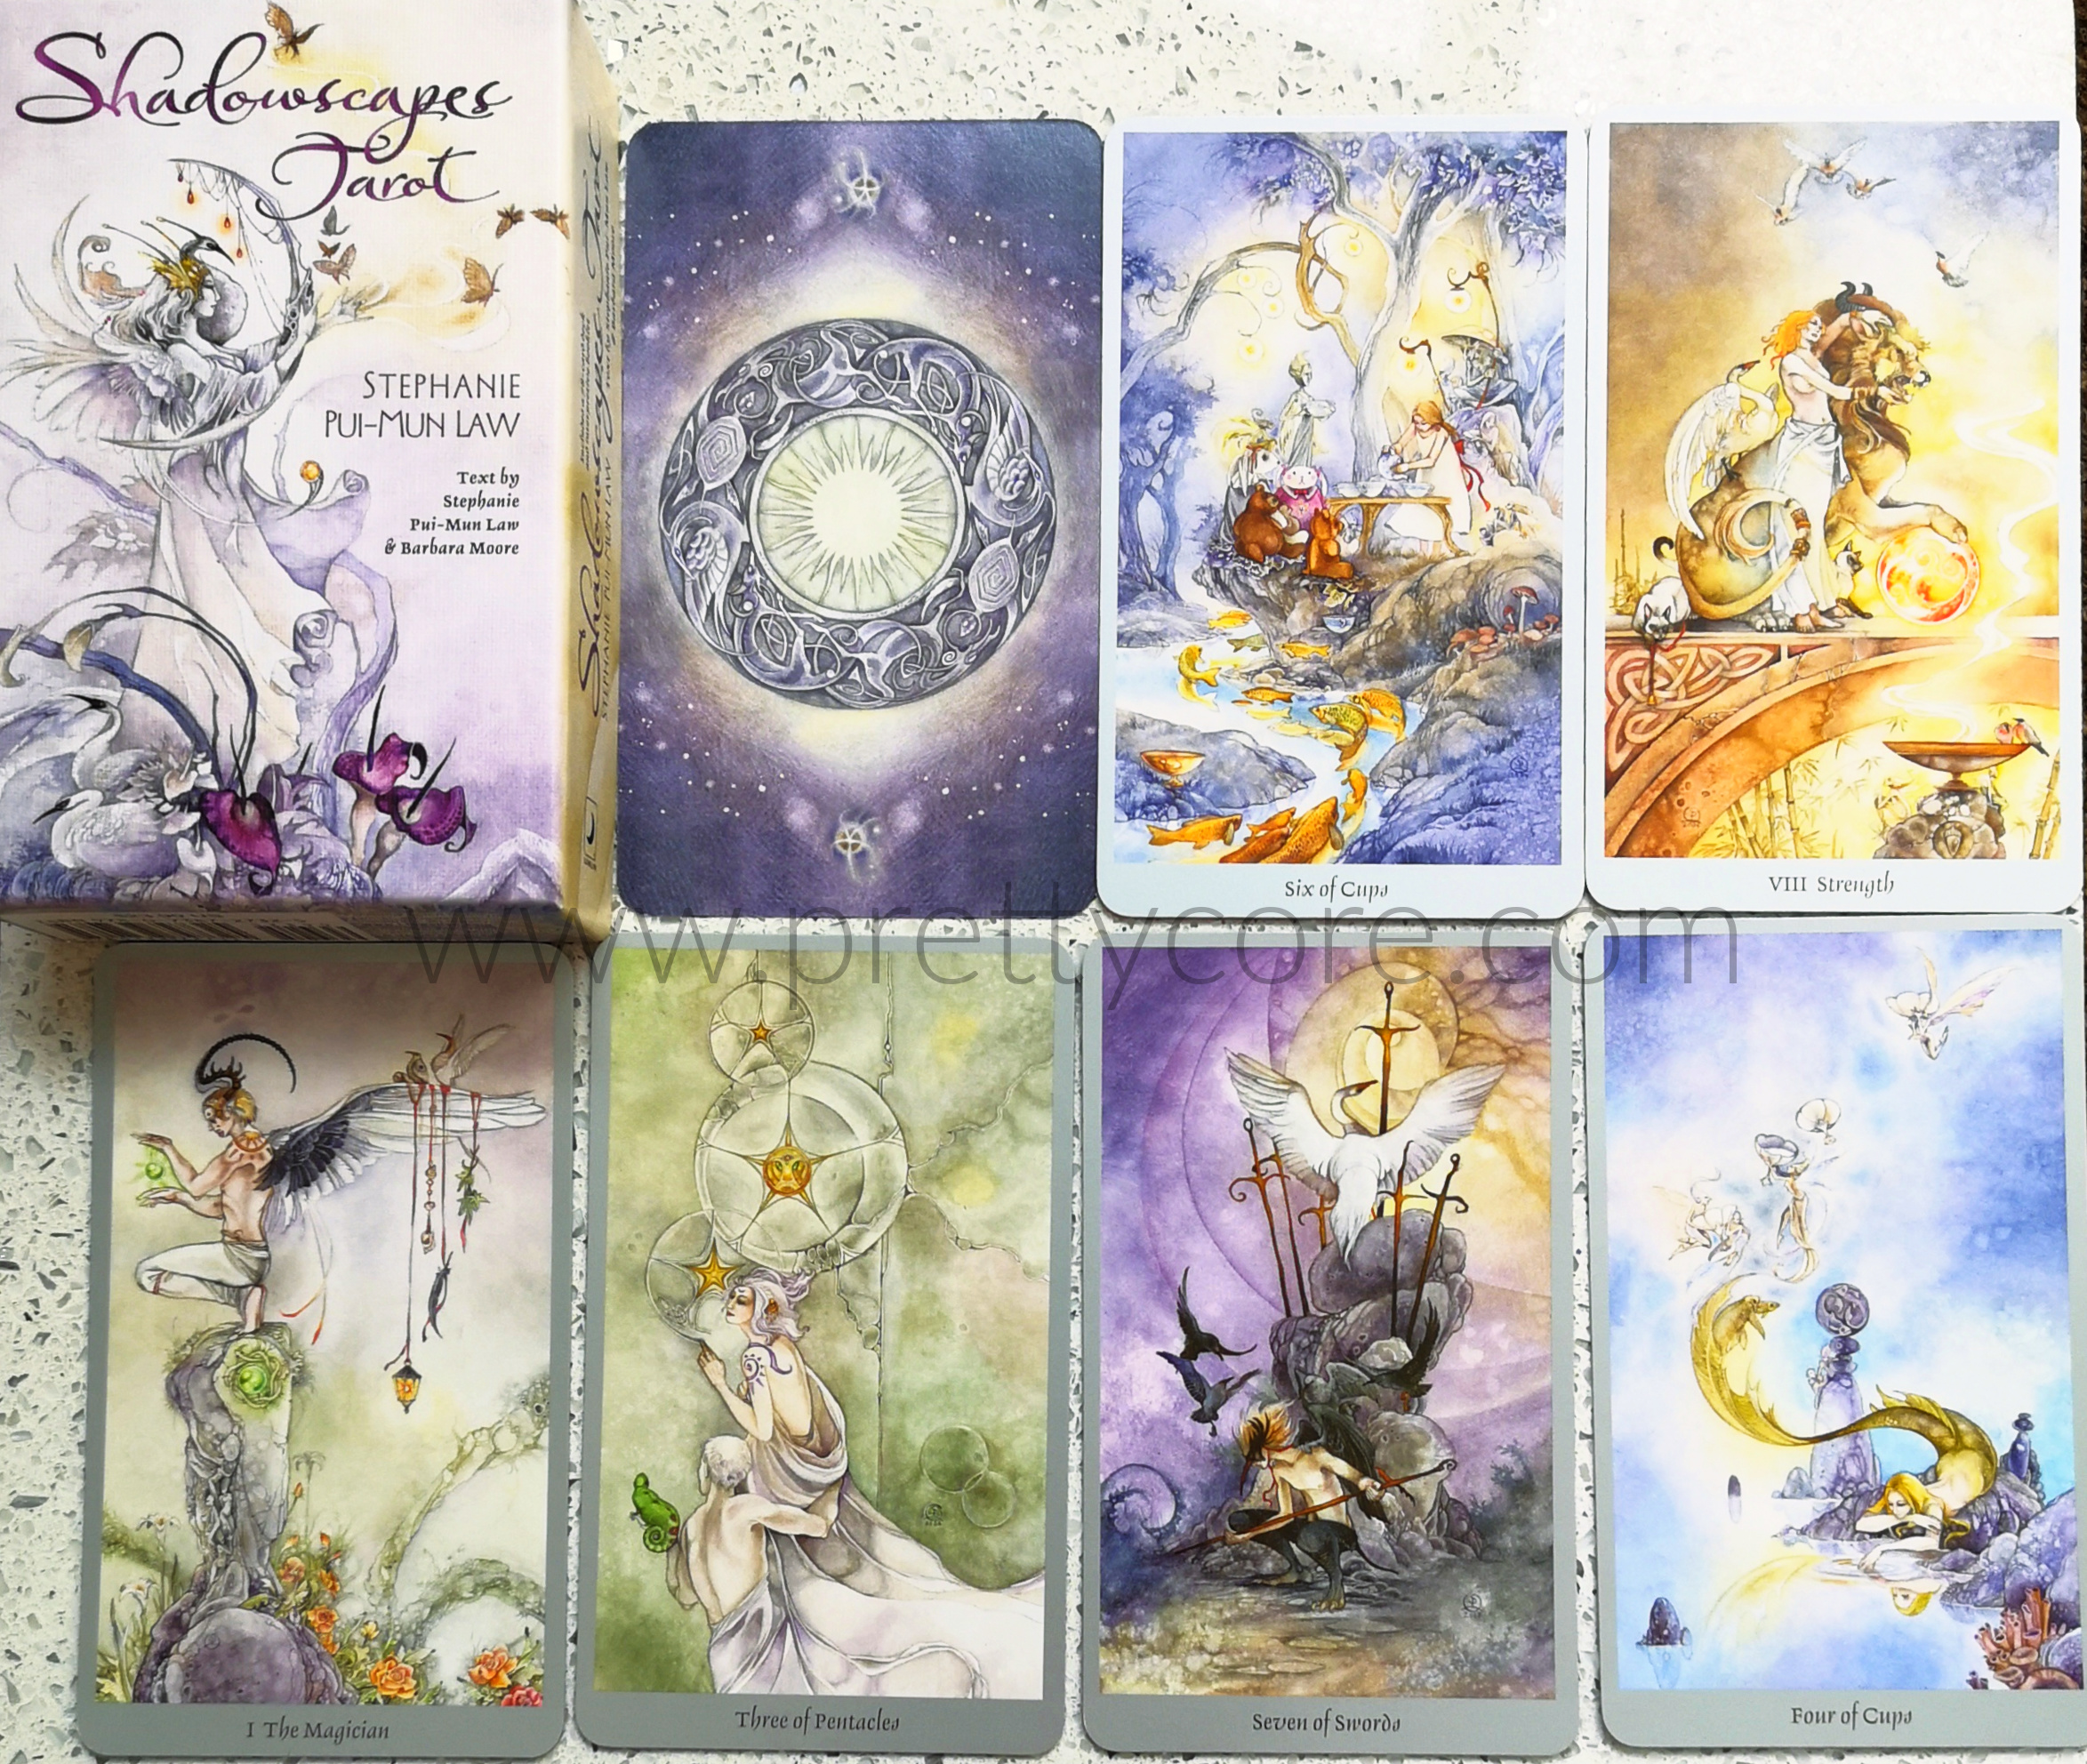 The Shadowscapes Tarot Review - Showing the packaging and several of the cards